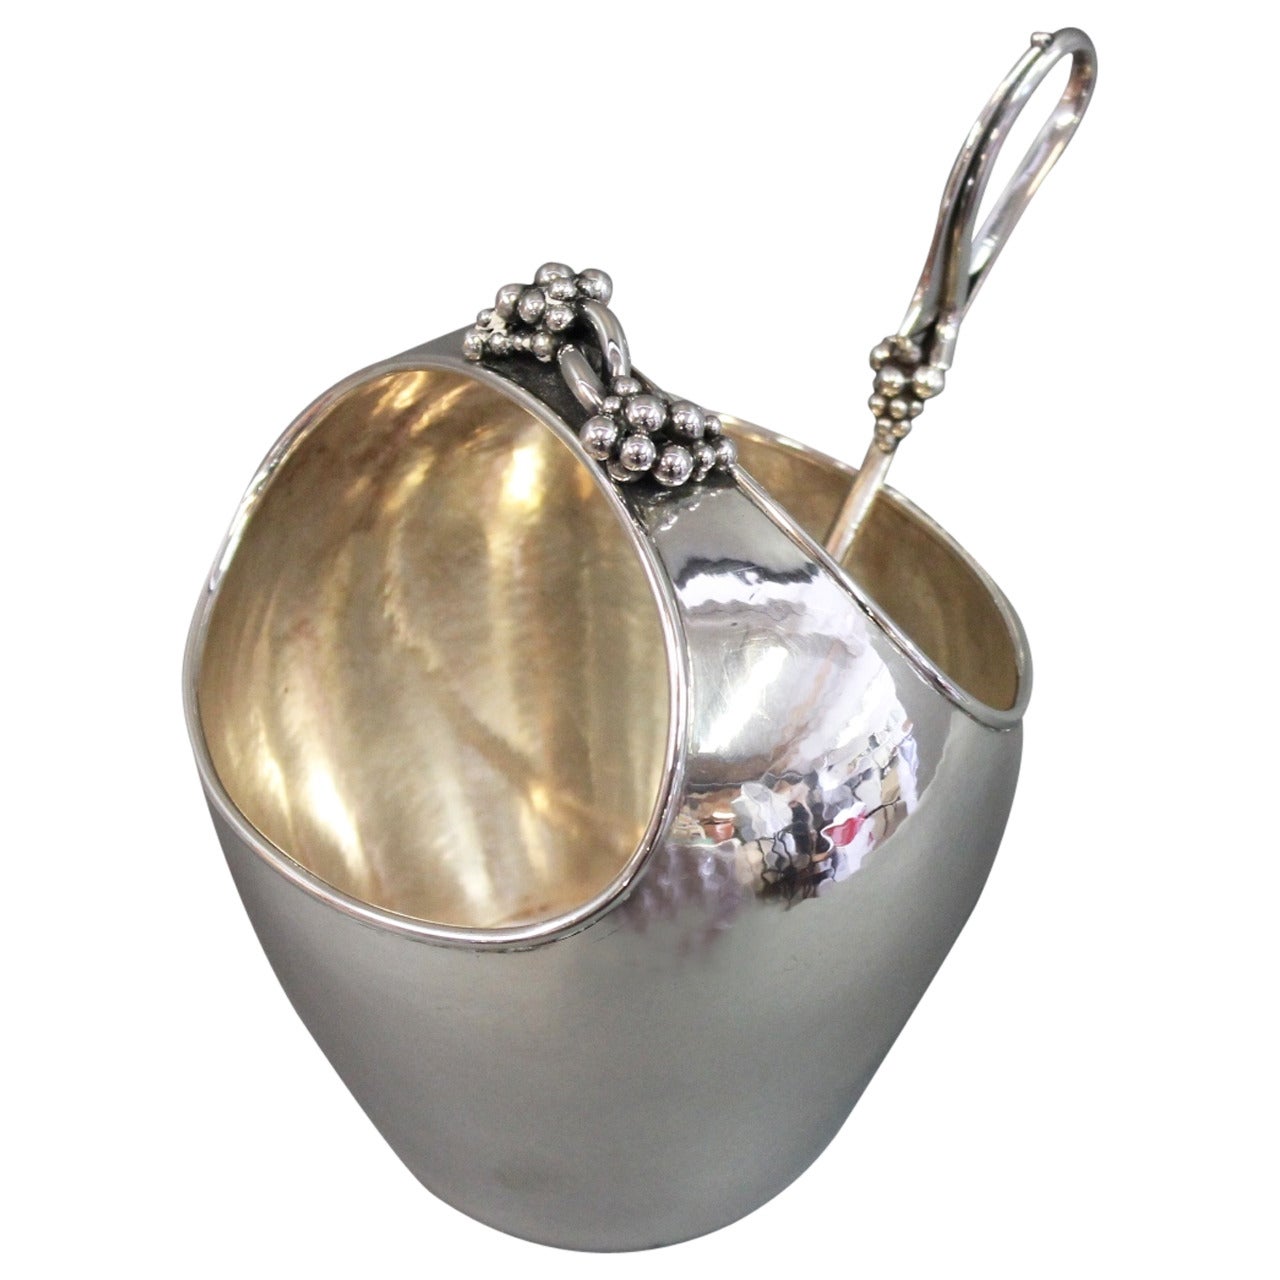 Silver Ice Bowl with Spoon, Stamped 835s, c. 1940